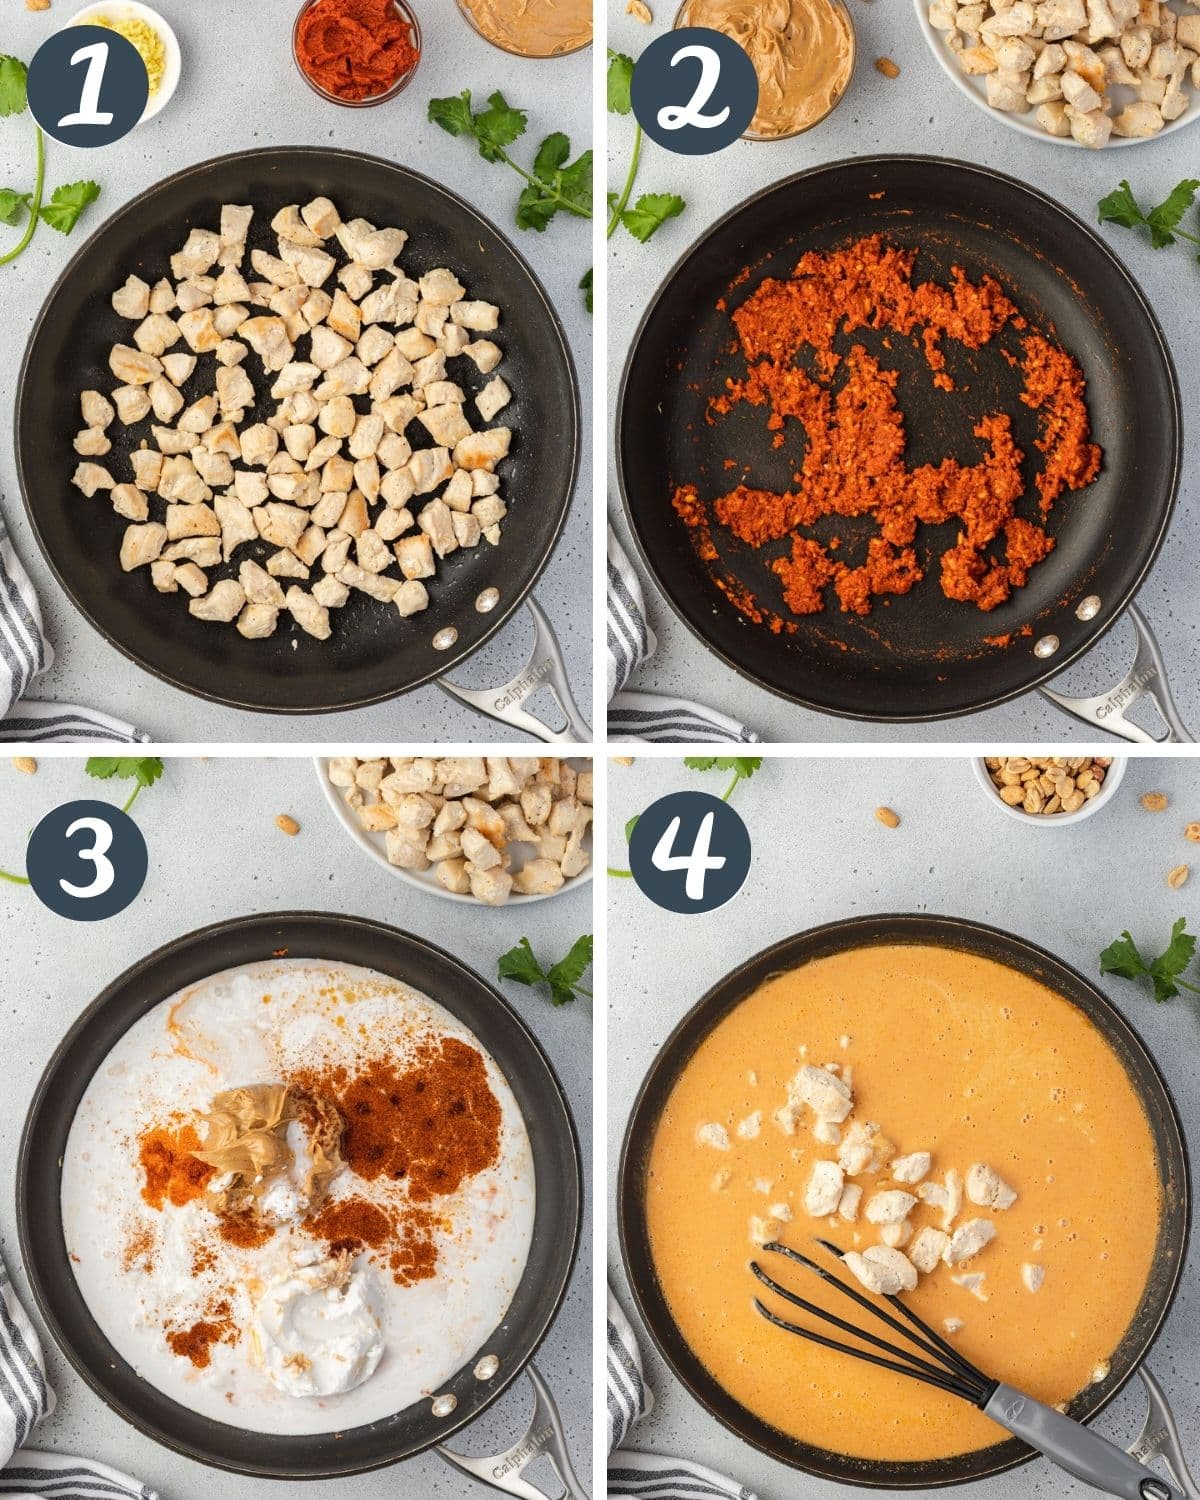 Collage showing 4 steps to make curry, including cooking chicken, red curry paste, coconut milk, and stirring sauce.